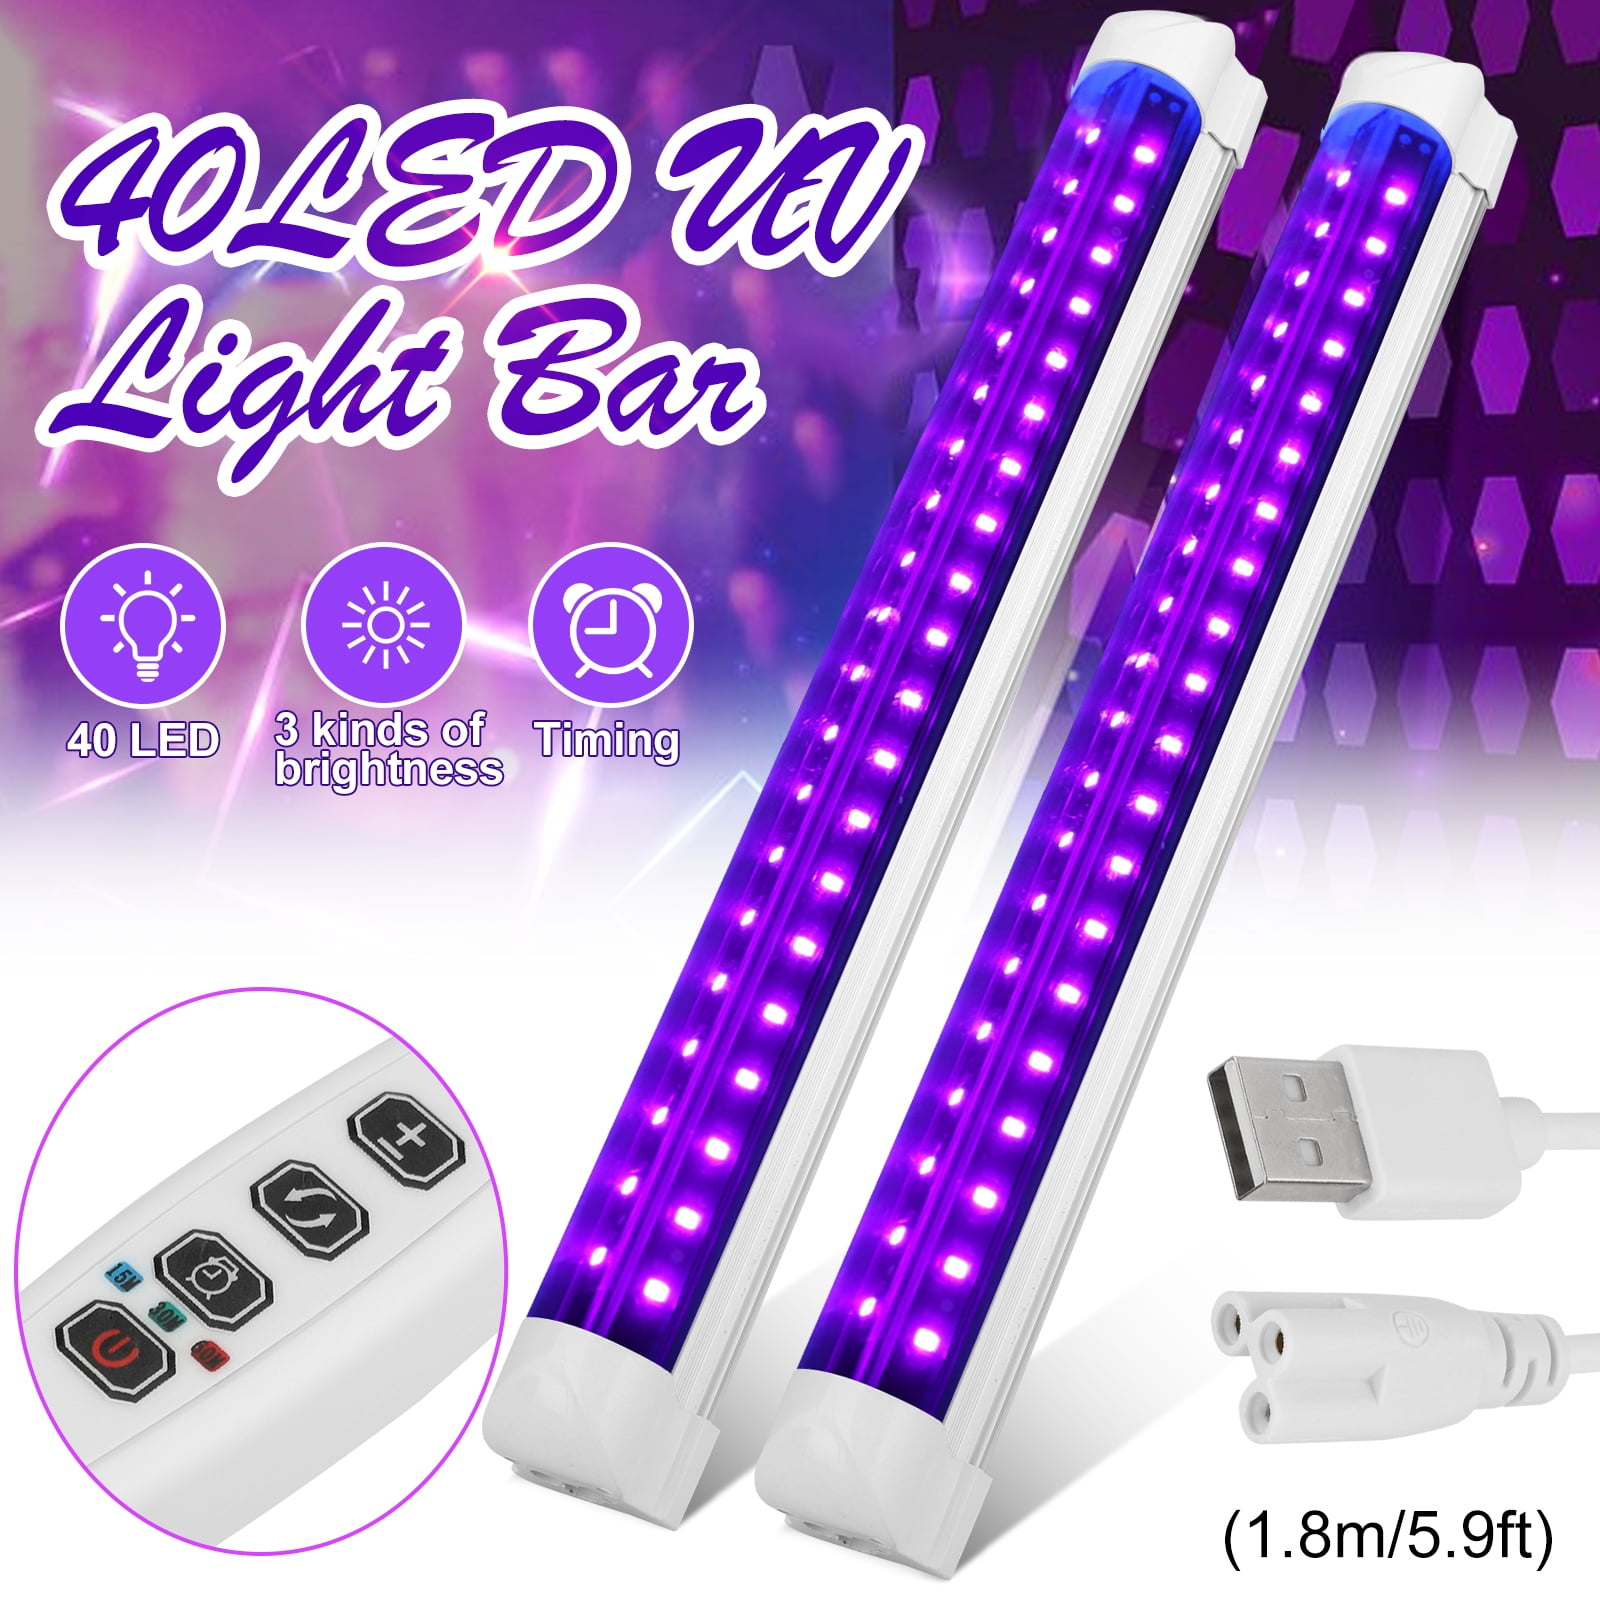 Purple Background Light,Black Lights for Glow Party,Wire Control